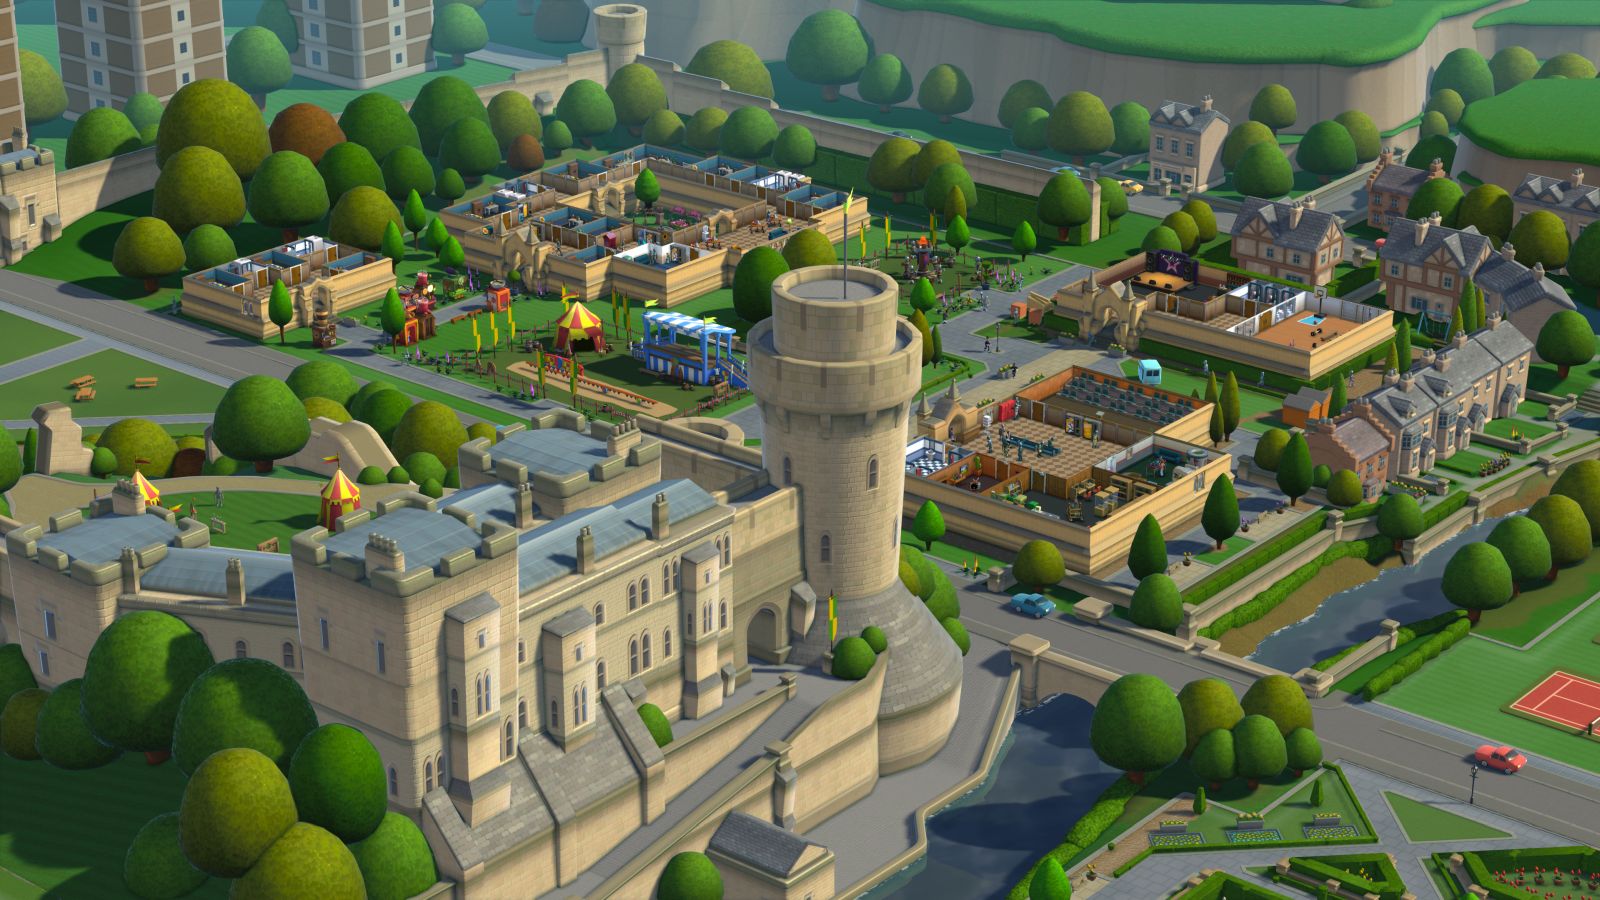 Two Point Hospital: Being able to build freeform is a game changer!